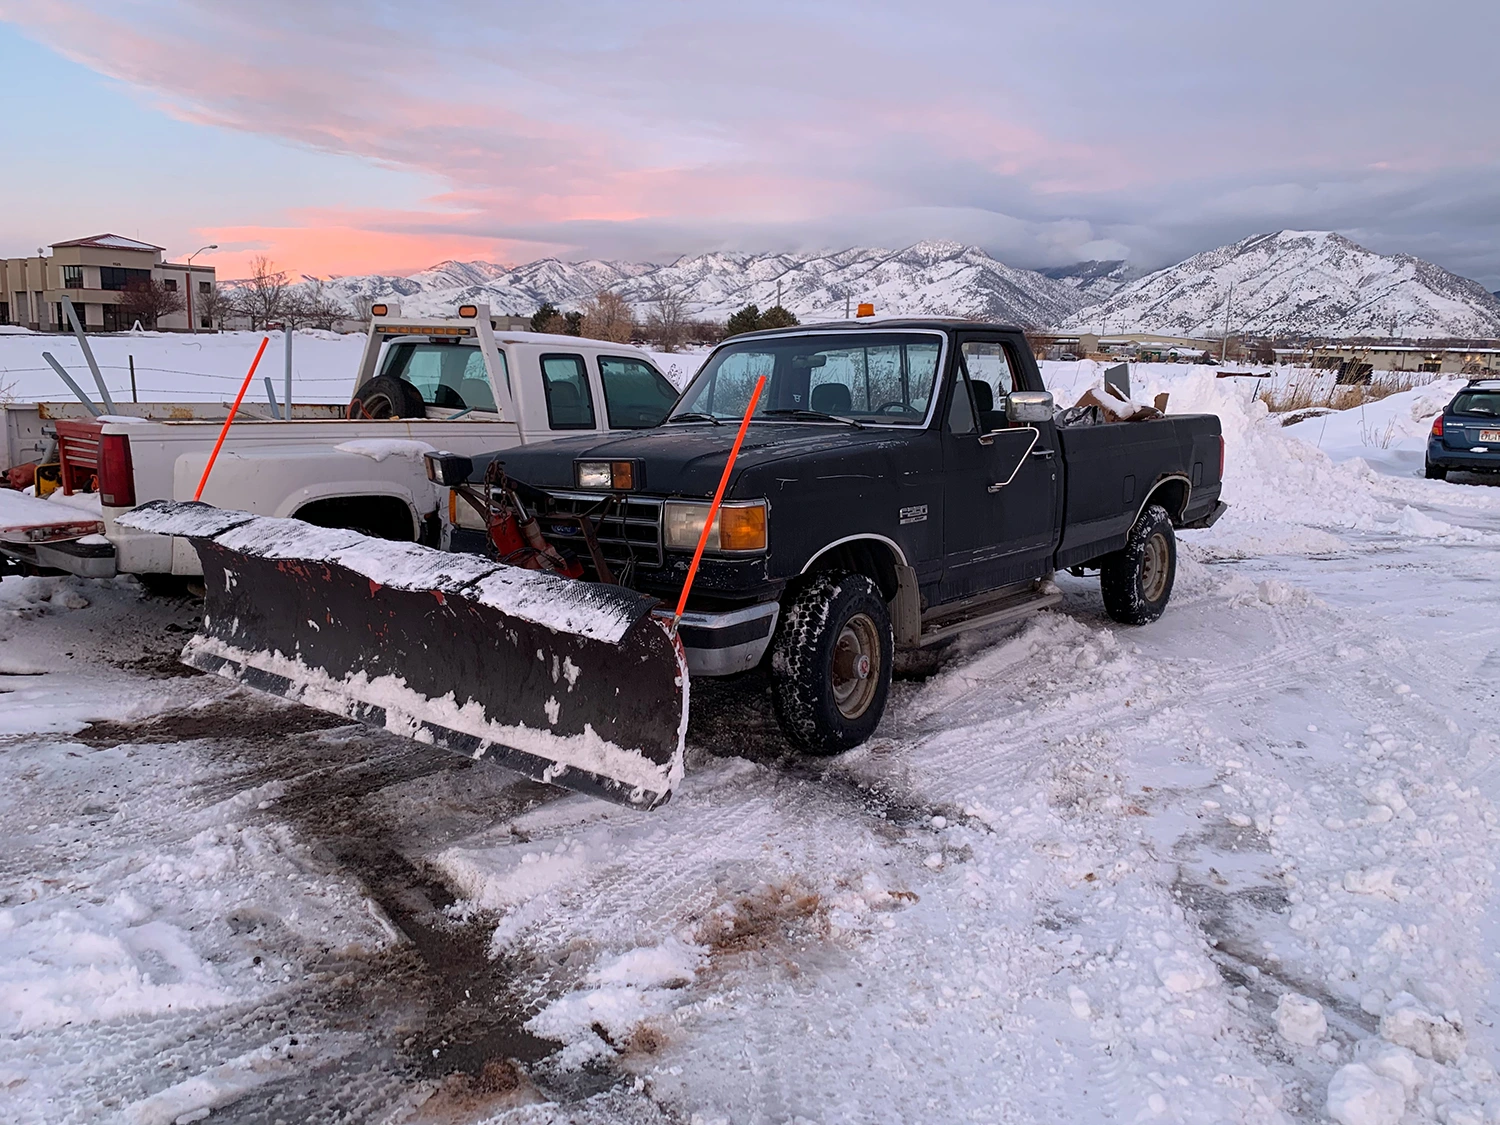 A truck with a plow parked in the snow.